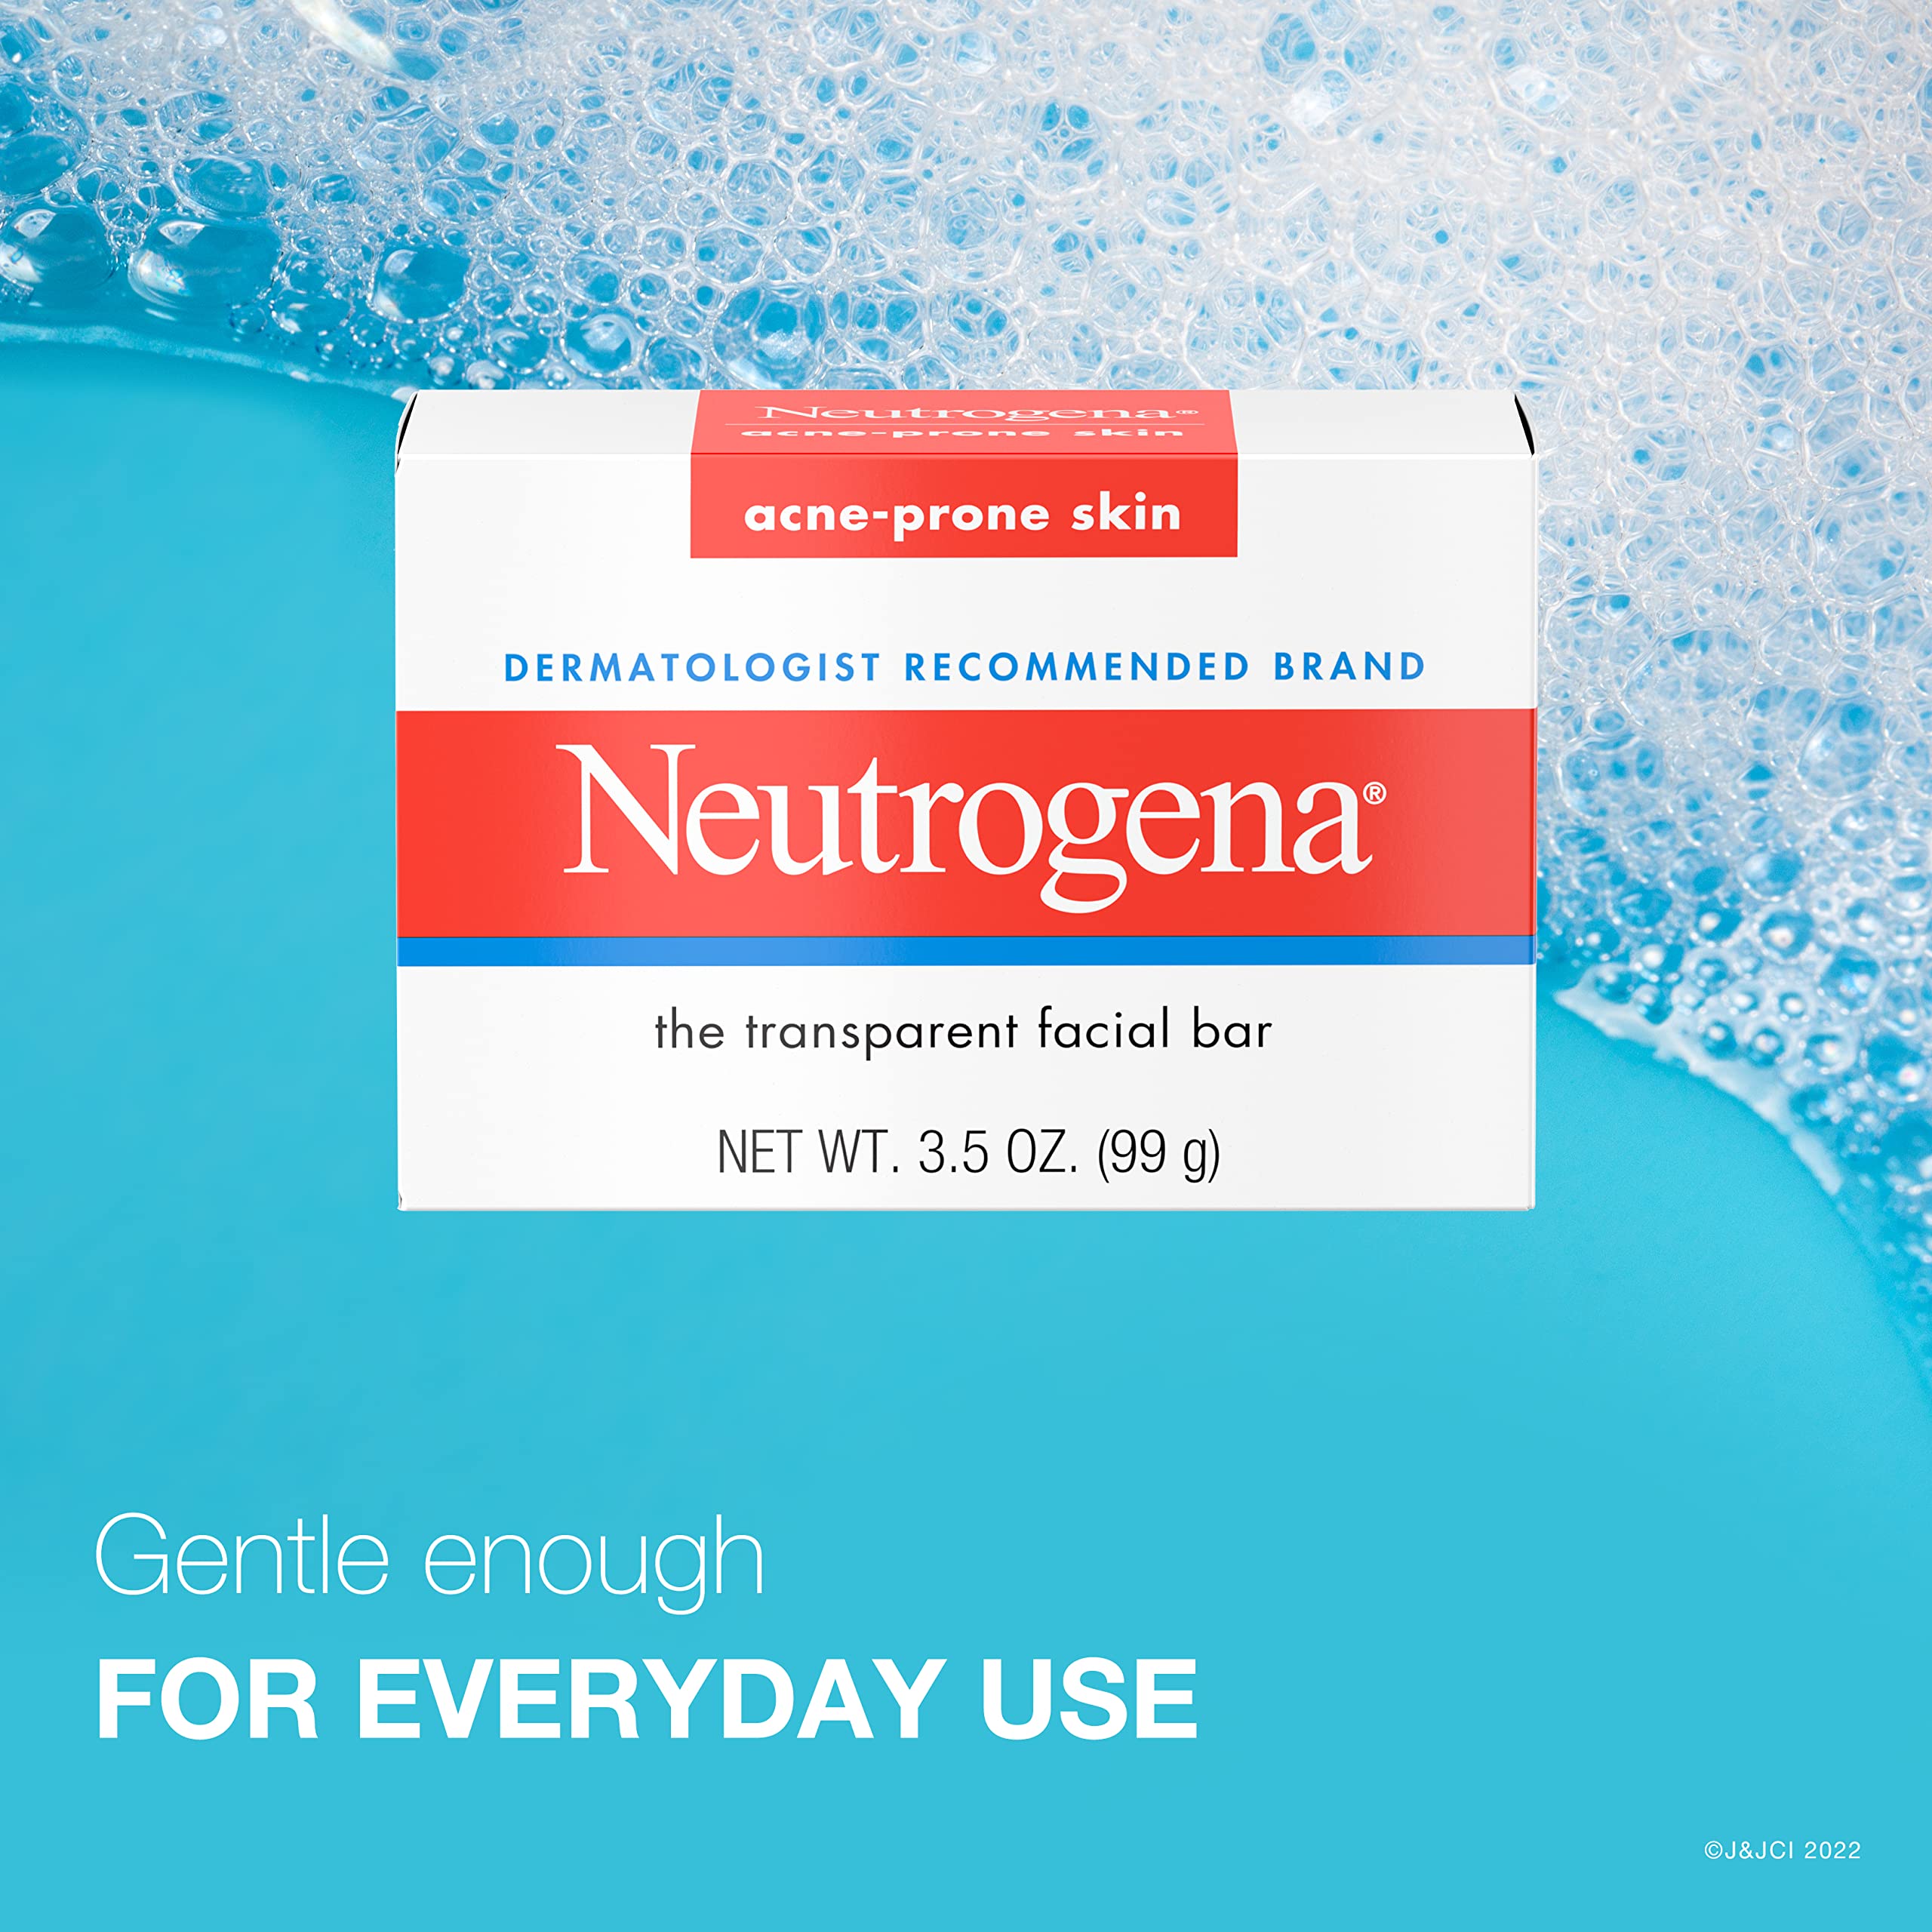 Neutrogena Facial Cleansing Bar Treatment for Acne-Prone Skin, Non-Medicated & Glycerin-Rich Formula Gently Cleanses without Over-Drying, No Detergents or Dyes, Non-Comedogenic, 3.5 oz